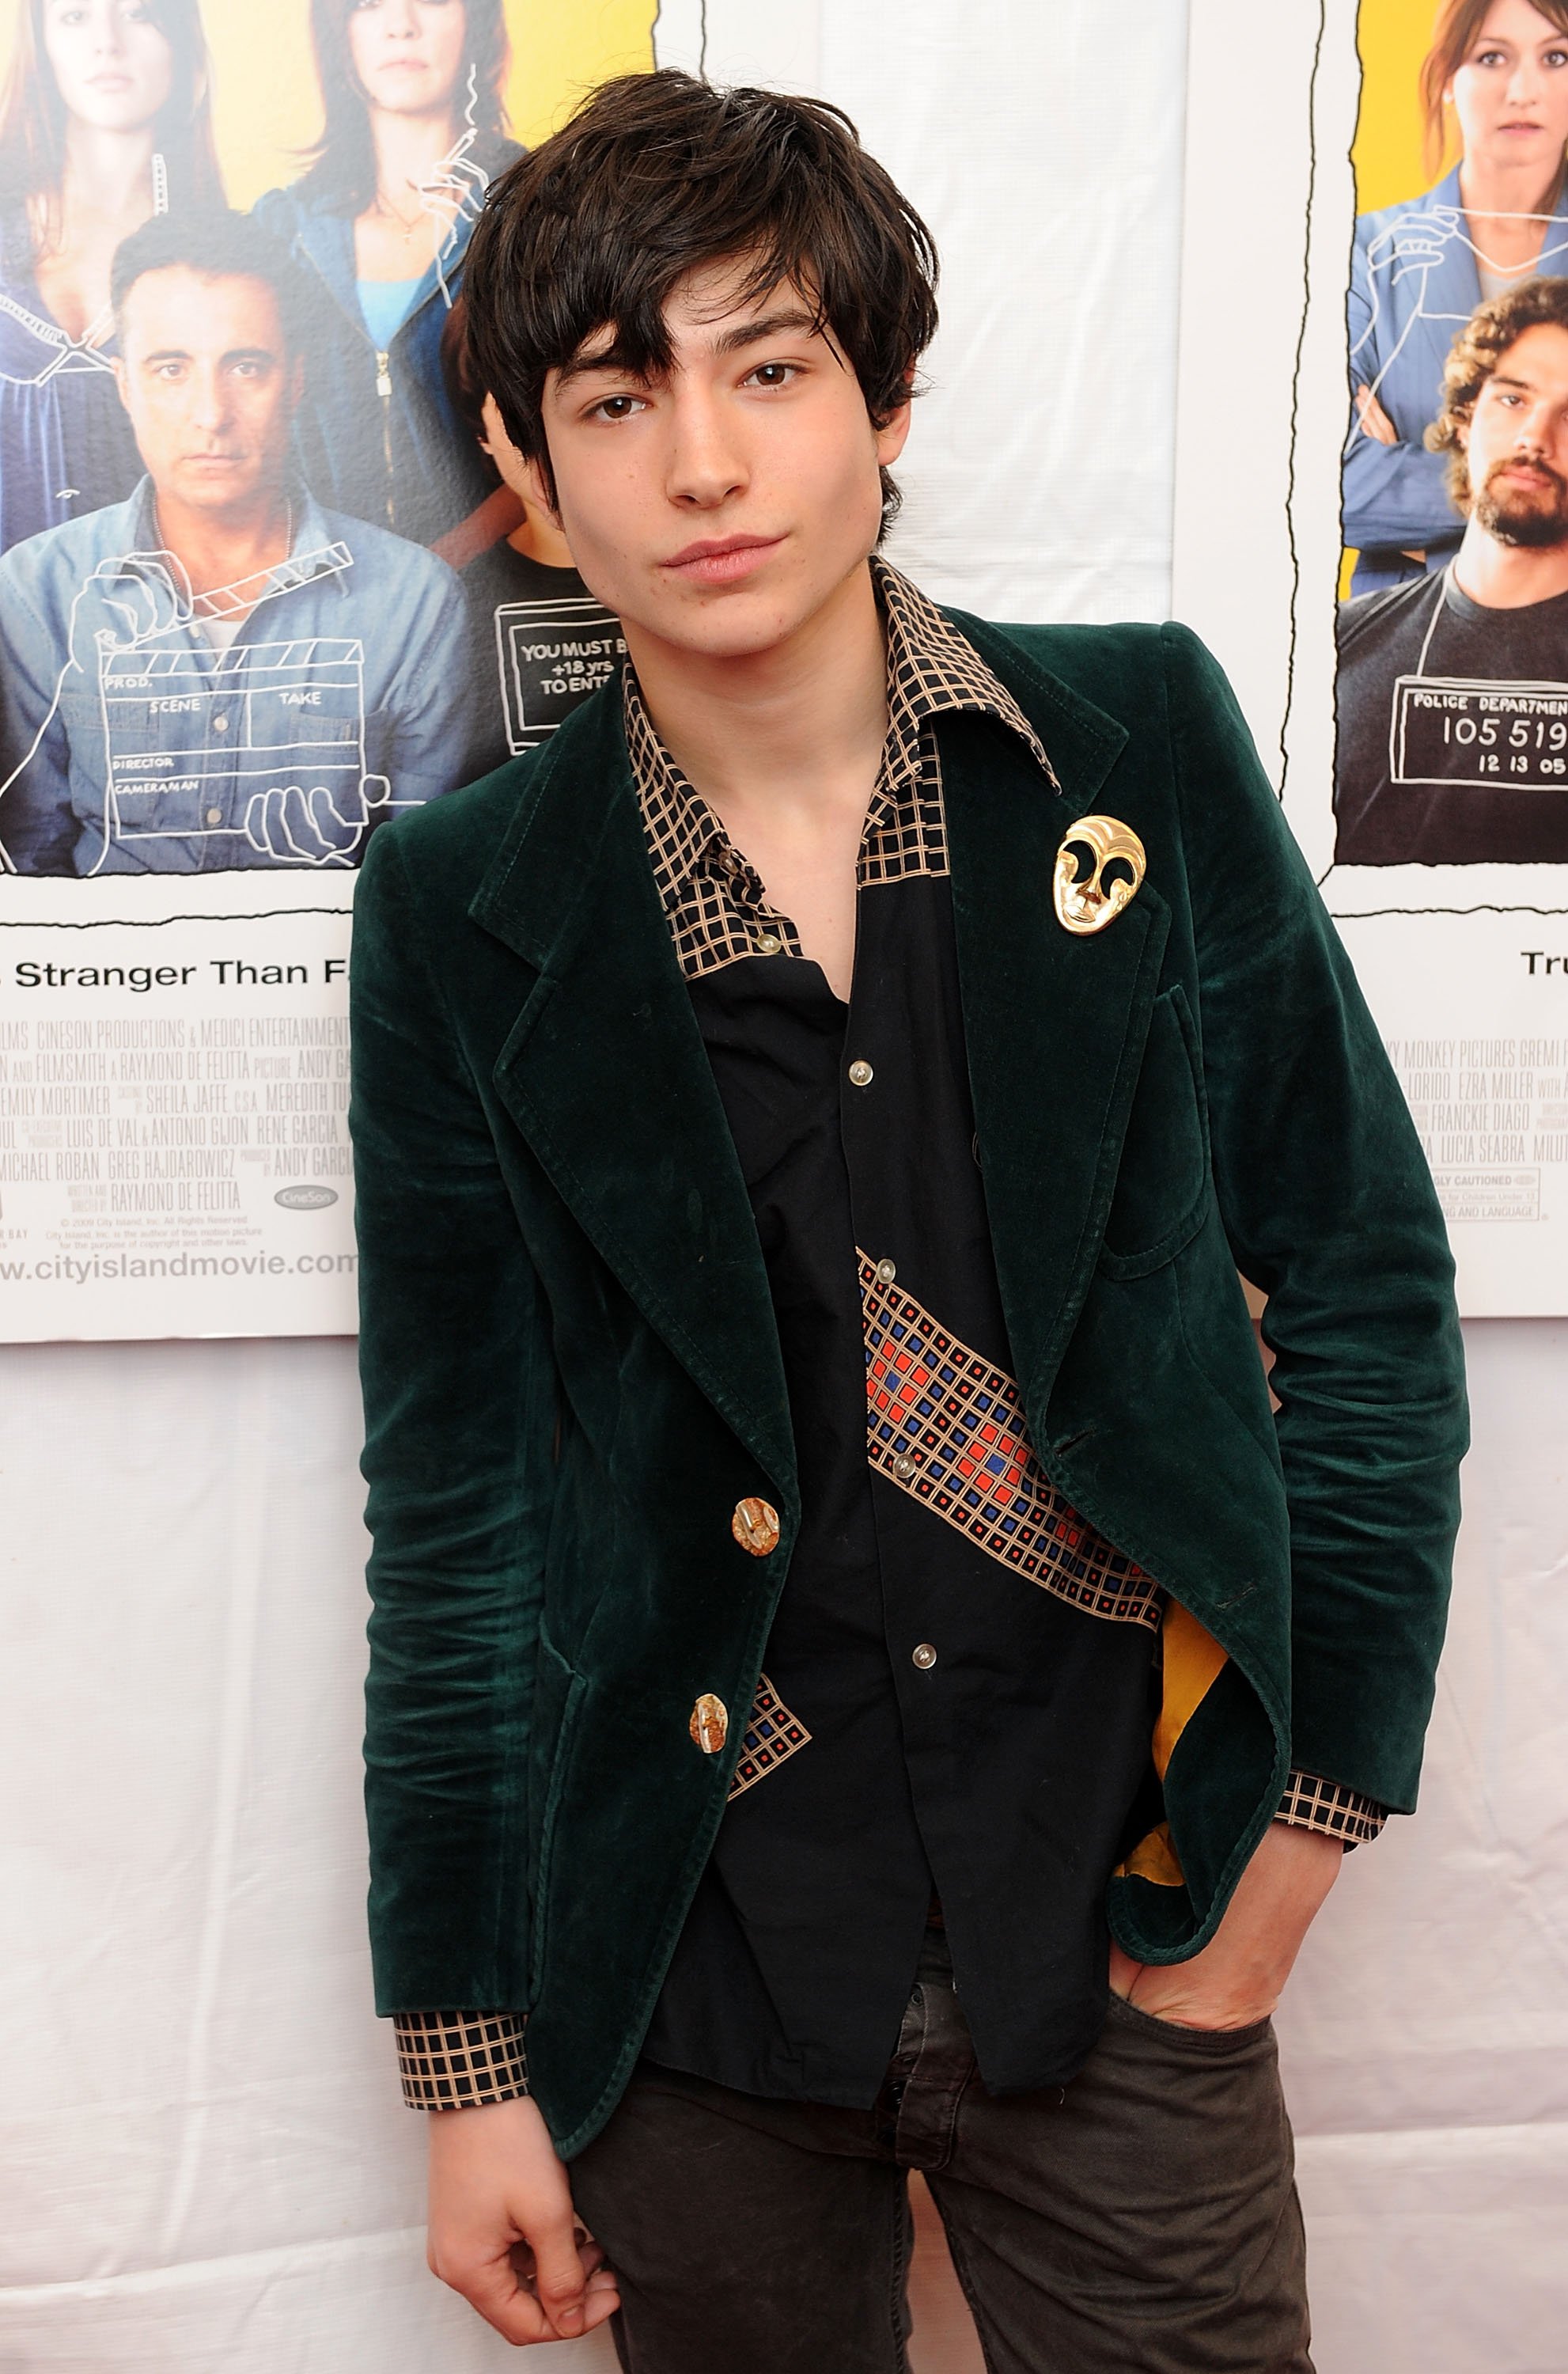 Ezra Miller at the premiere of "City Island" on March 10, 2010 | Source: Getty Images